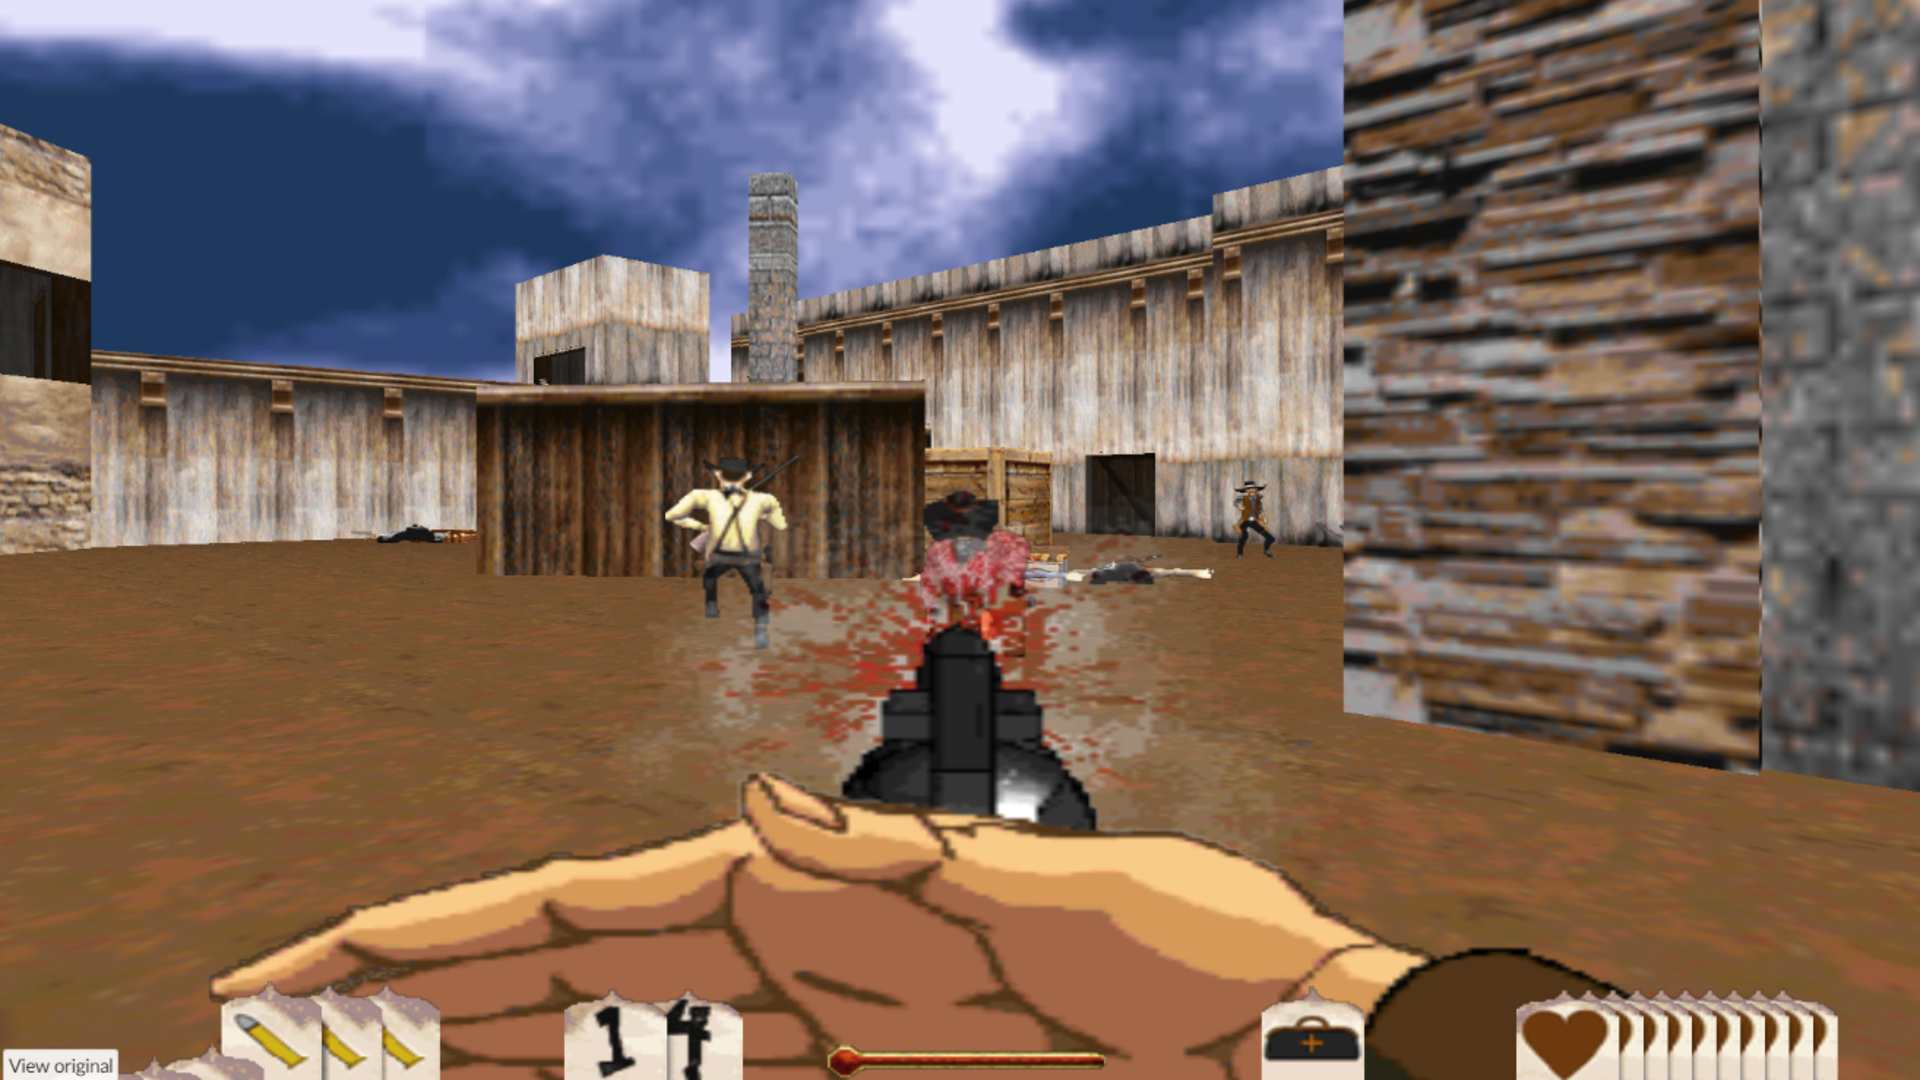 Shooting some bandits in western game Outlaws